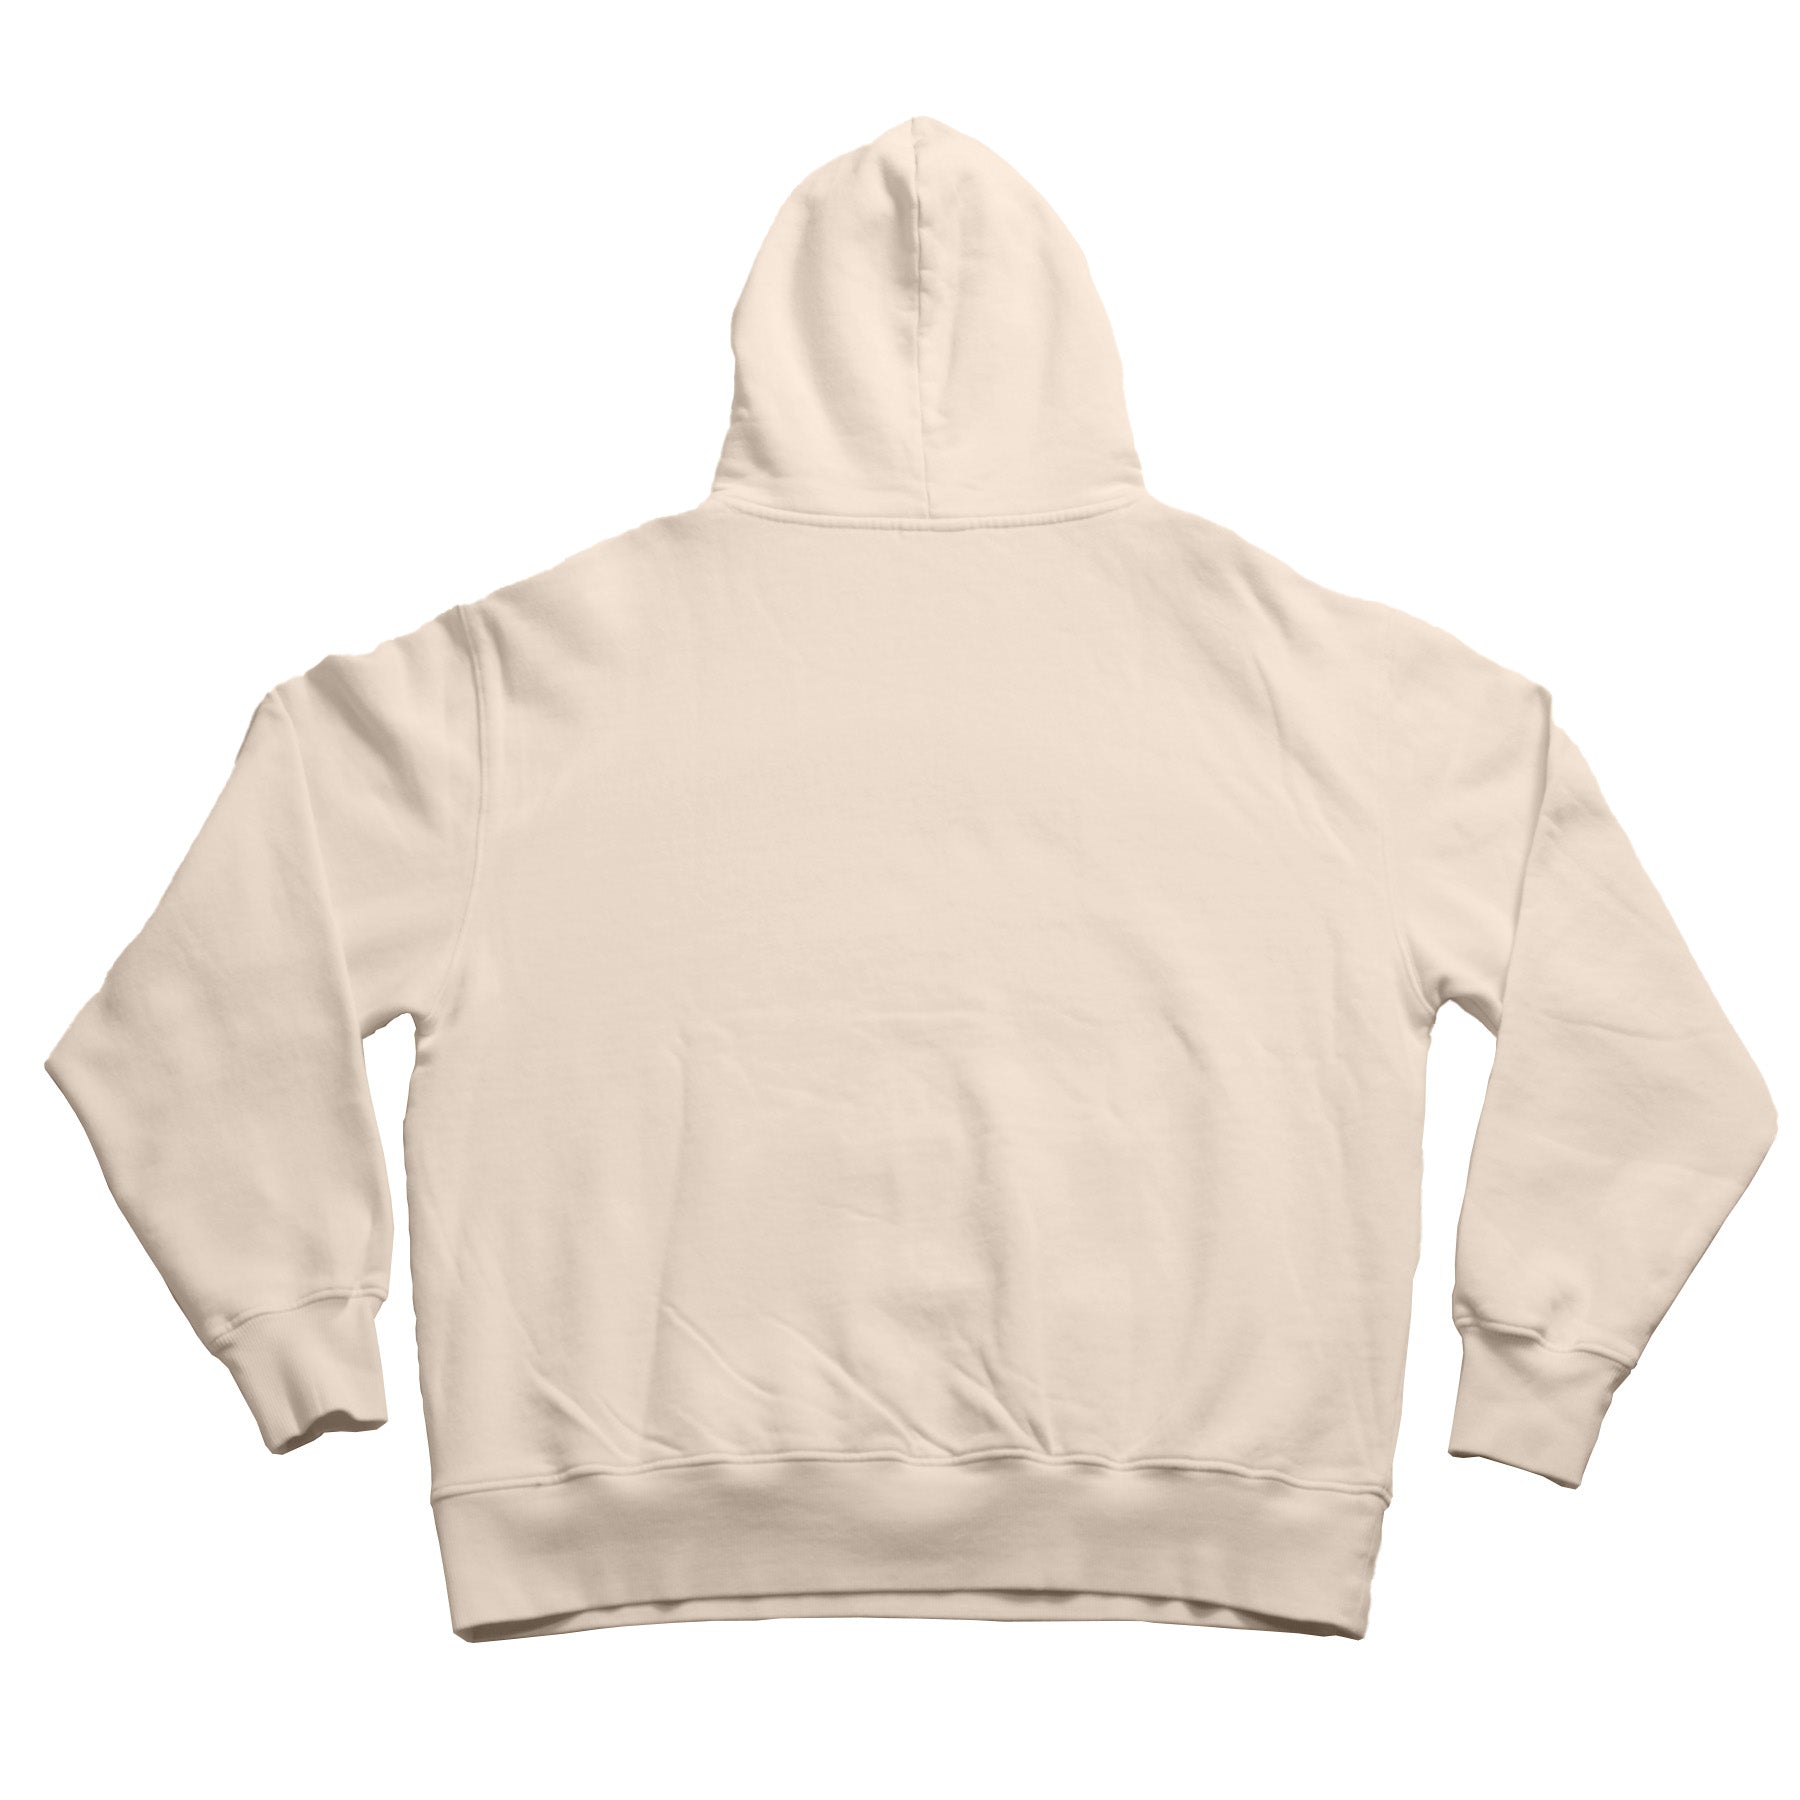 The - Persian - Version - Official Movie Wear - Hoodie - Cream - Back - Neds Melrose